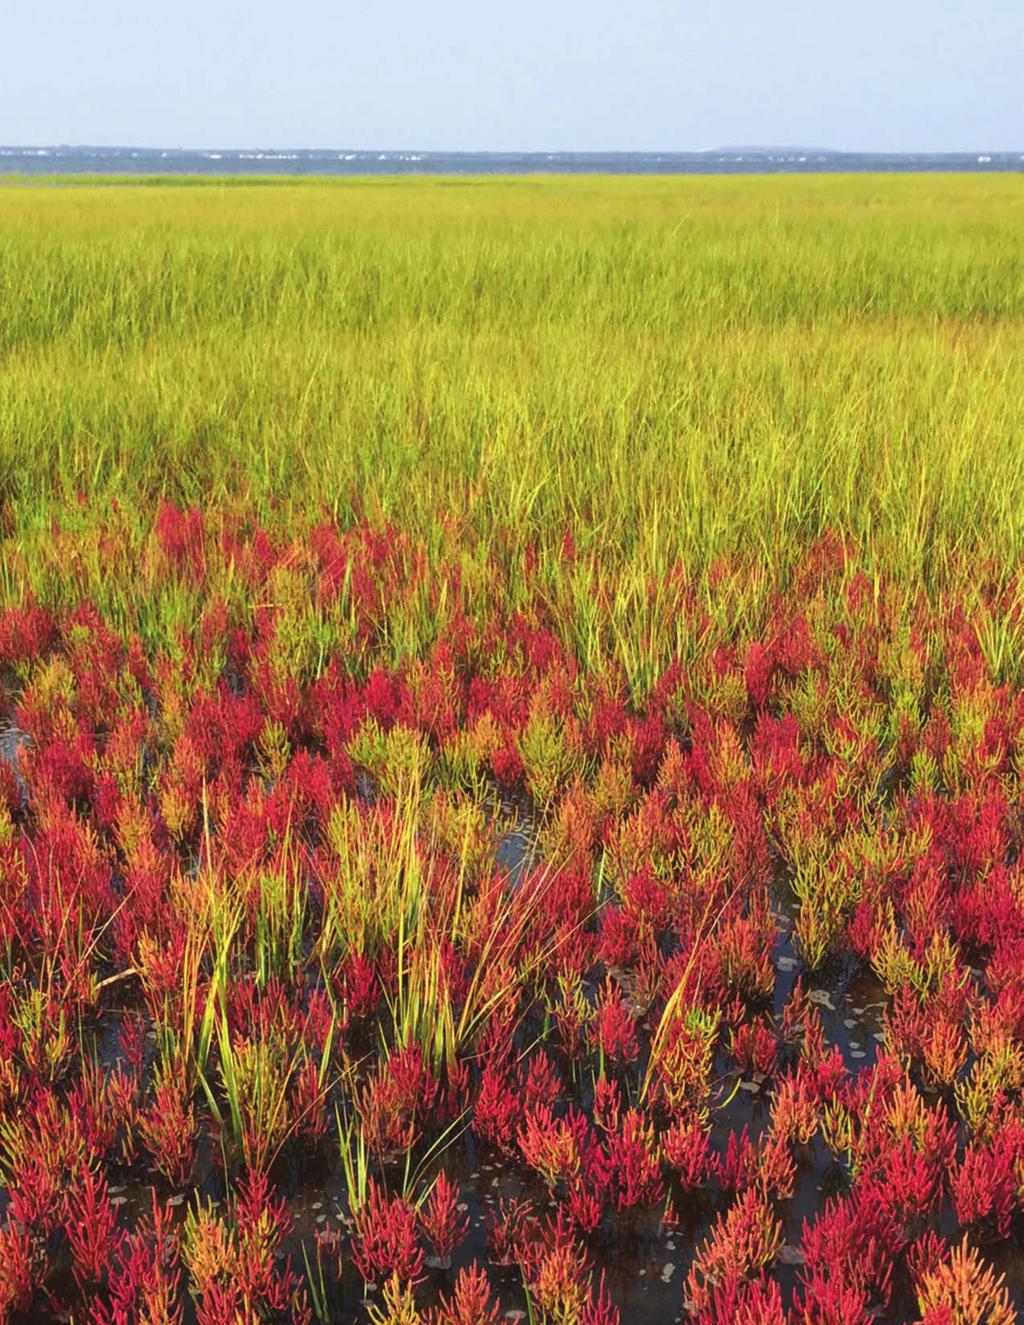 Coastal National Parks in the Northeast are comprised of some of the more pristine salt marsh habitat in the world, but